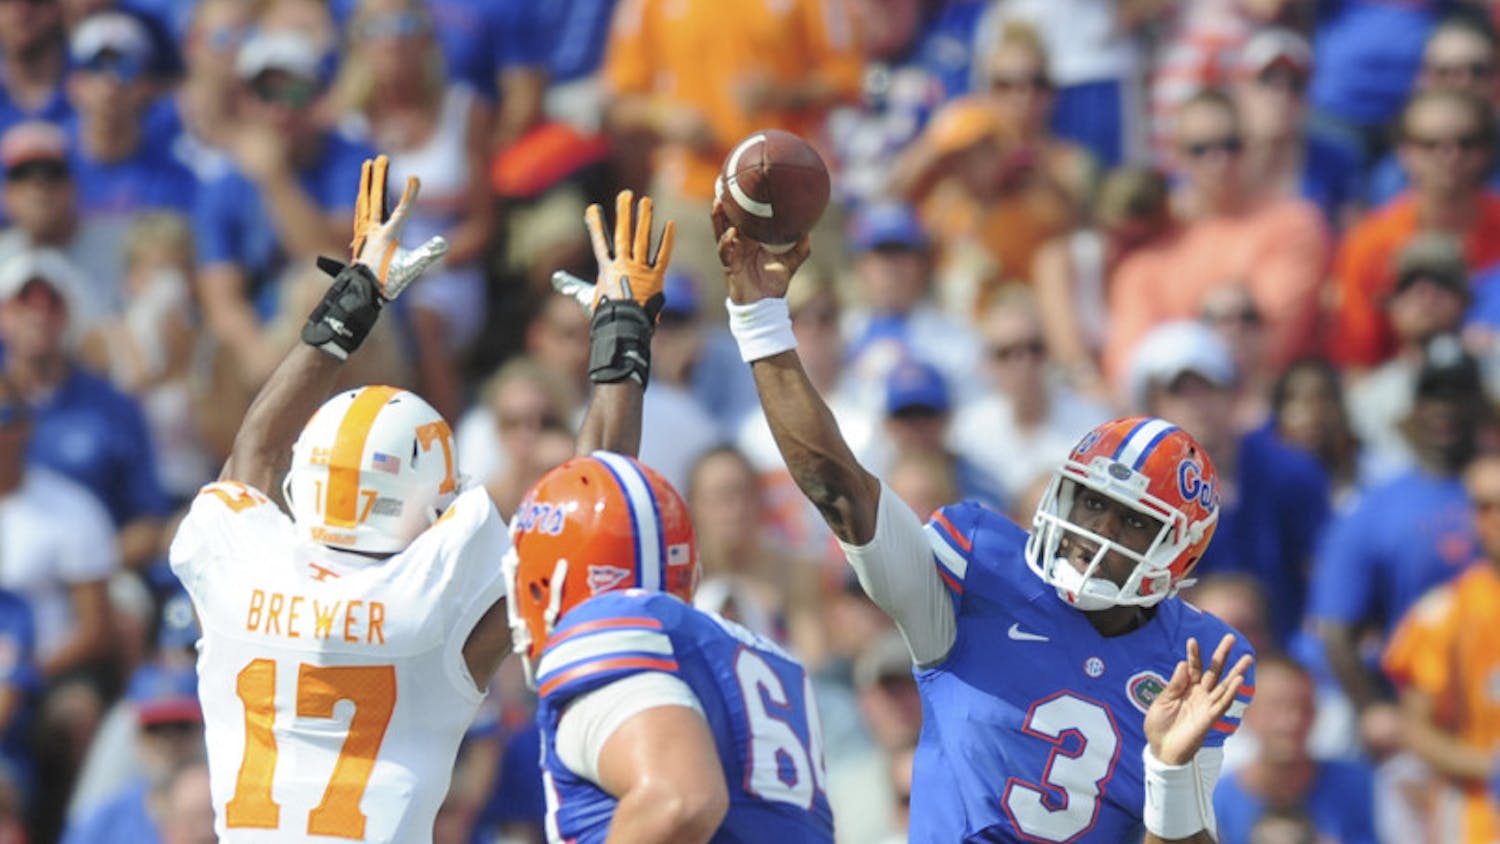 Tyler Murphy took over at quarterback for the injured Jeff Driskel and completed 8 of his 14 passes for 134 yards and a touchdown Saturday against Tennessee.